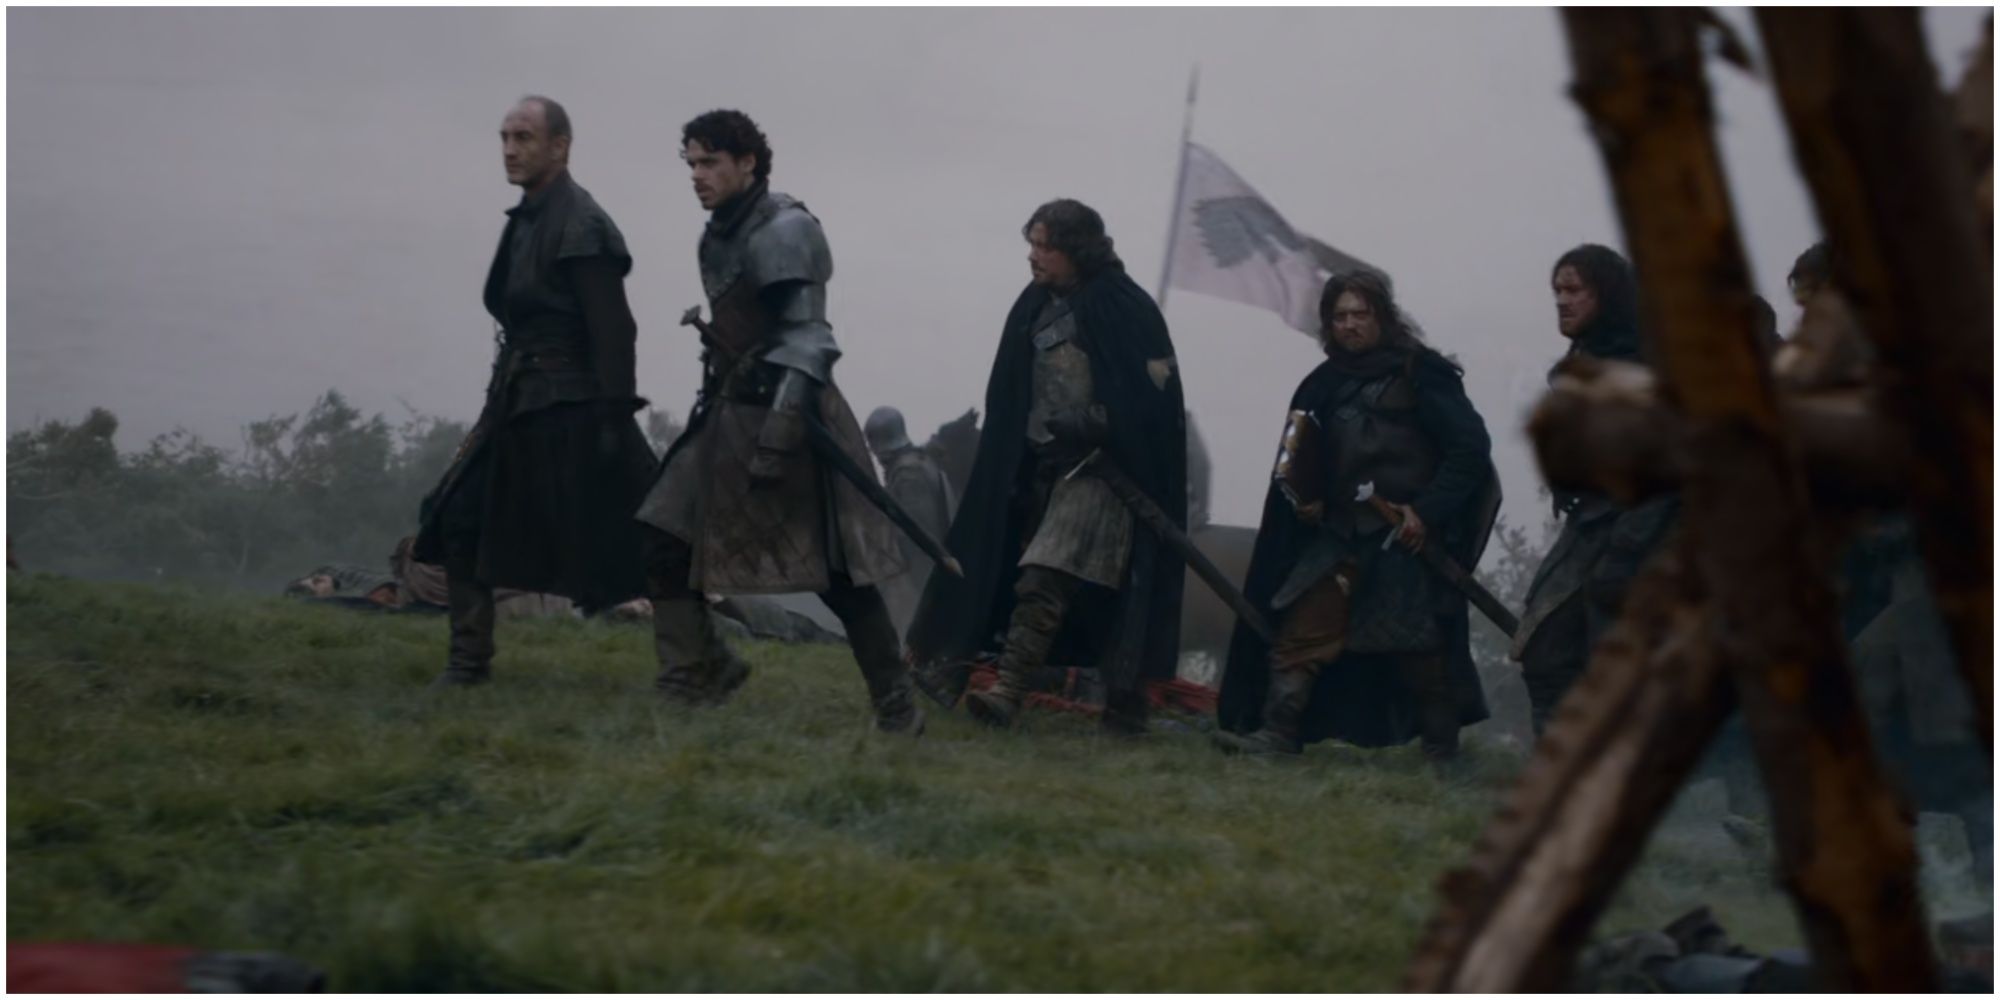 Roose Bolton and Robb Stark at Oxcross in Game of Thrones.